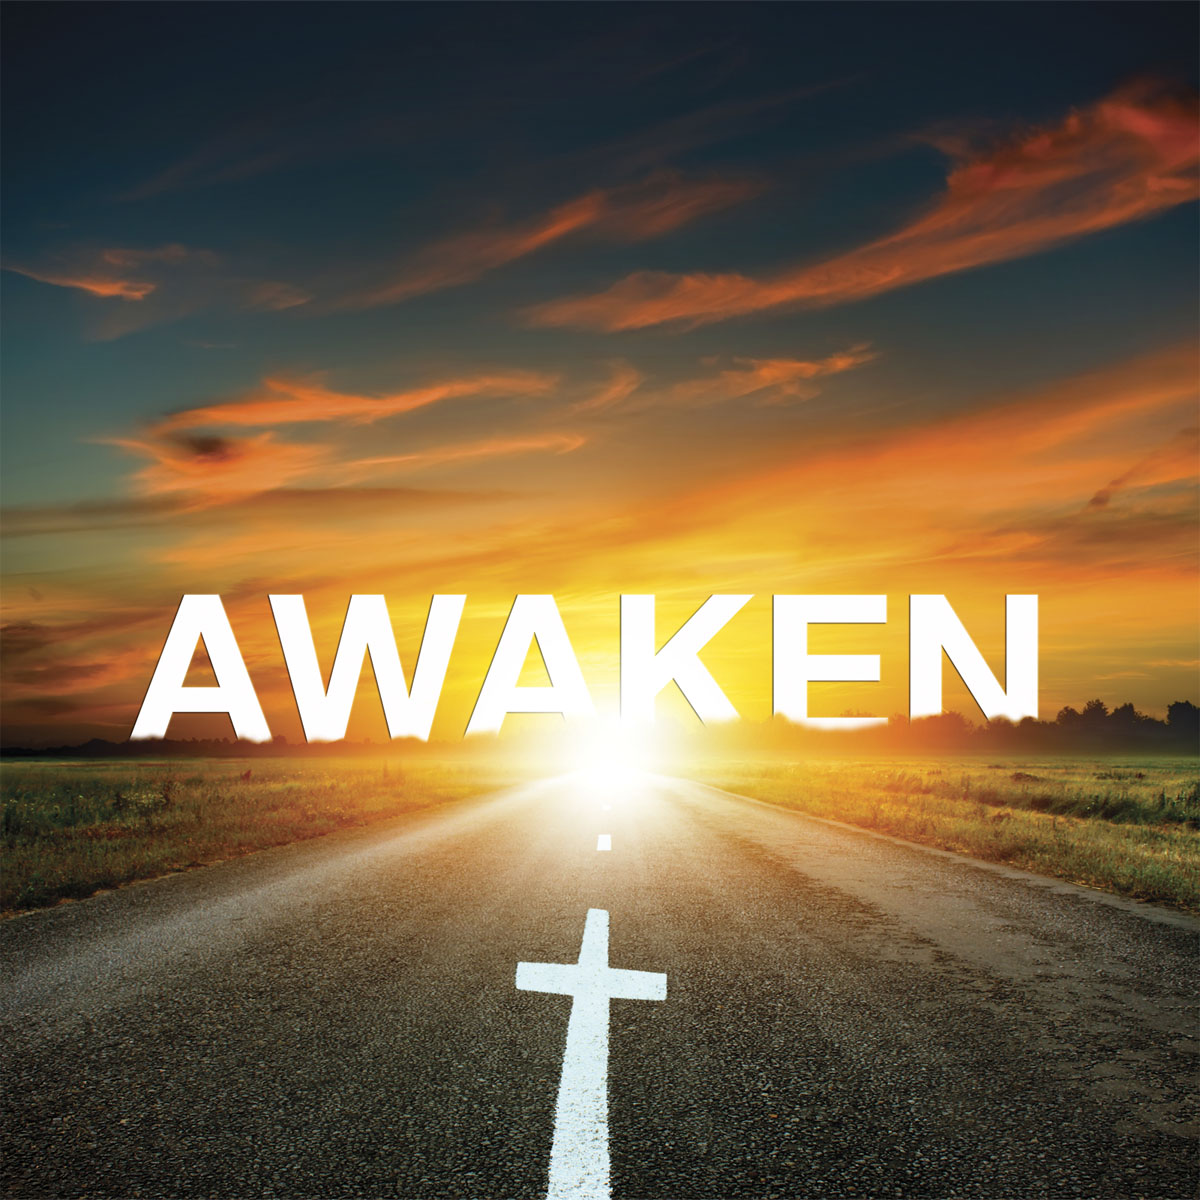 AWAKEN TO WHAT GOD IS UP TO